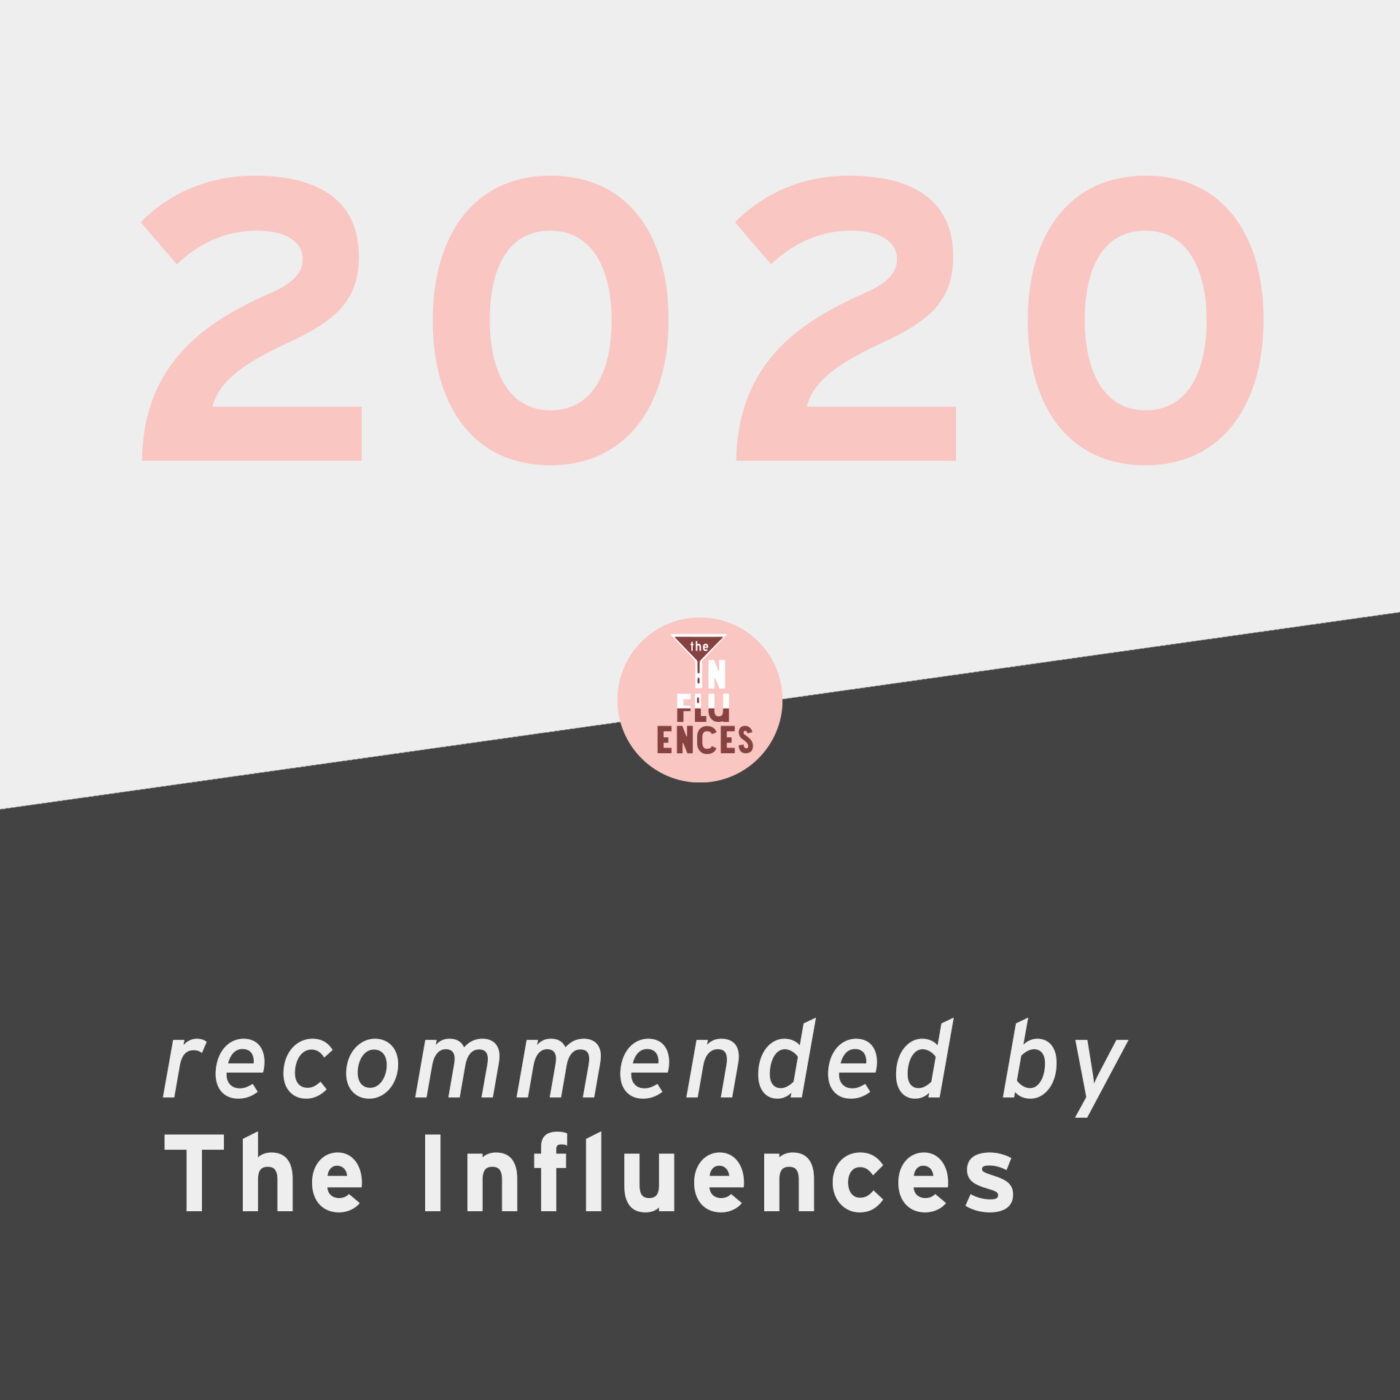 2020, recommended by The Influences